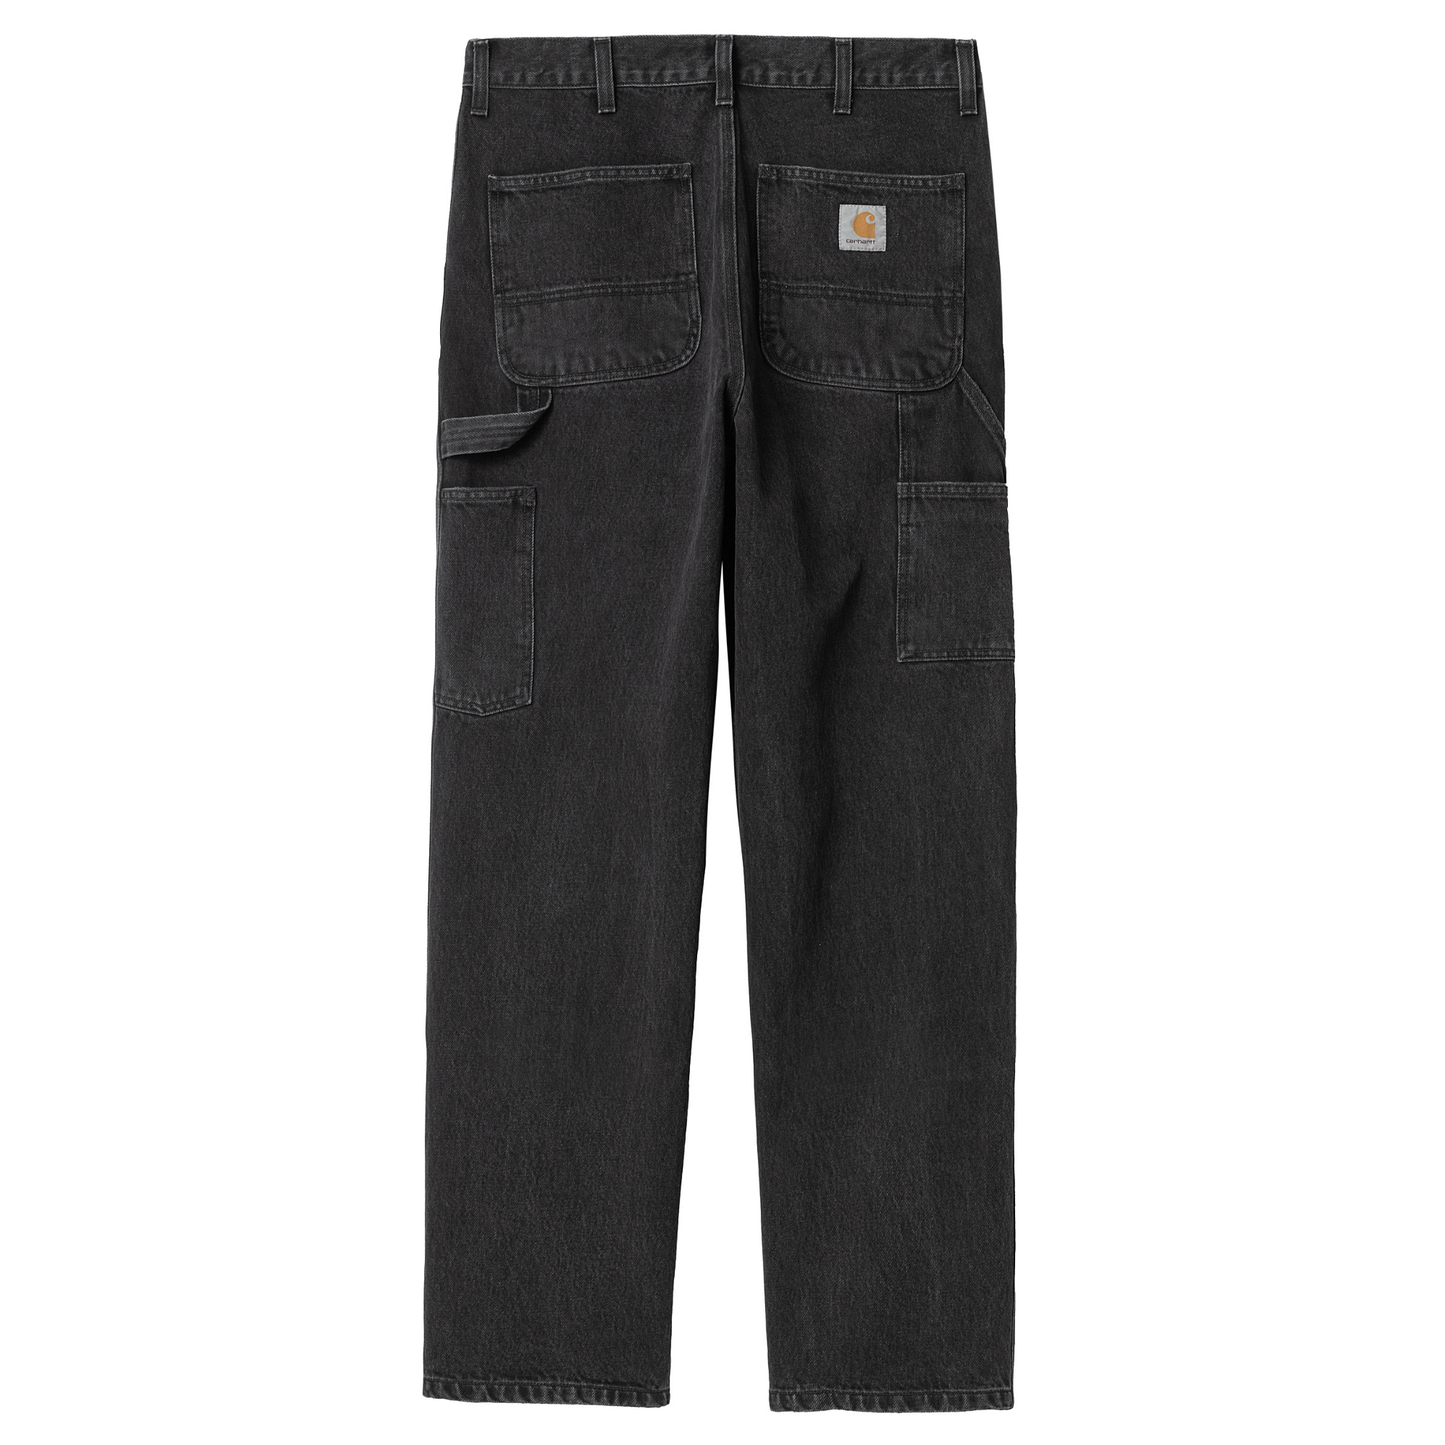 Carhartt WIP Double Knee Pant Black Stone Washed